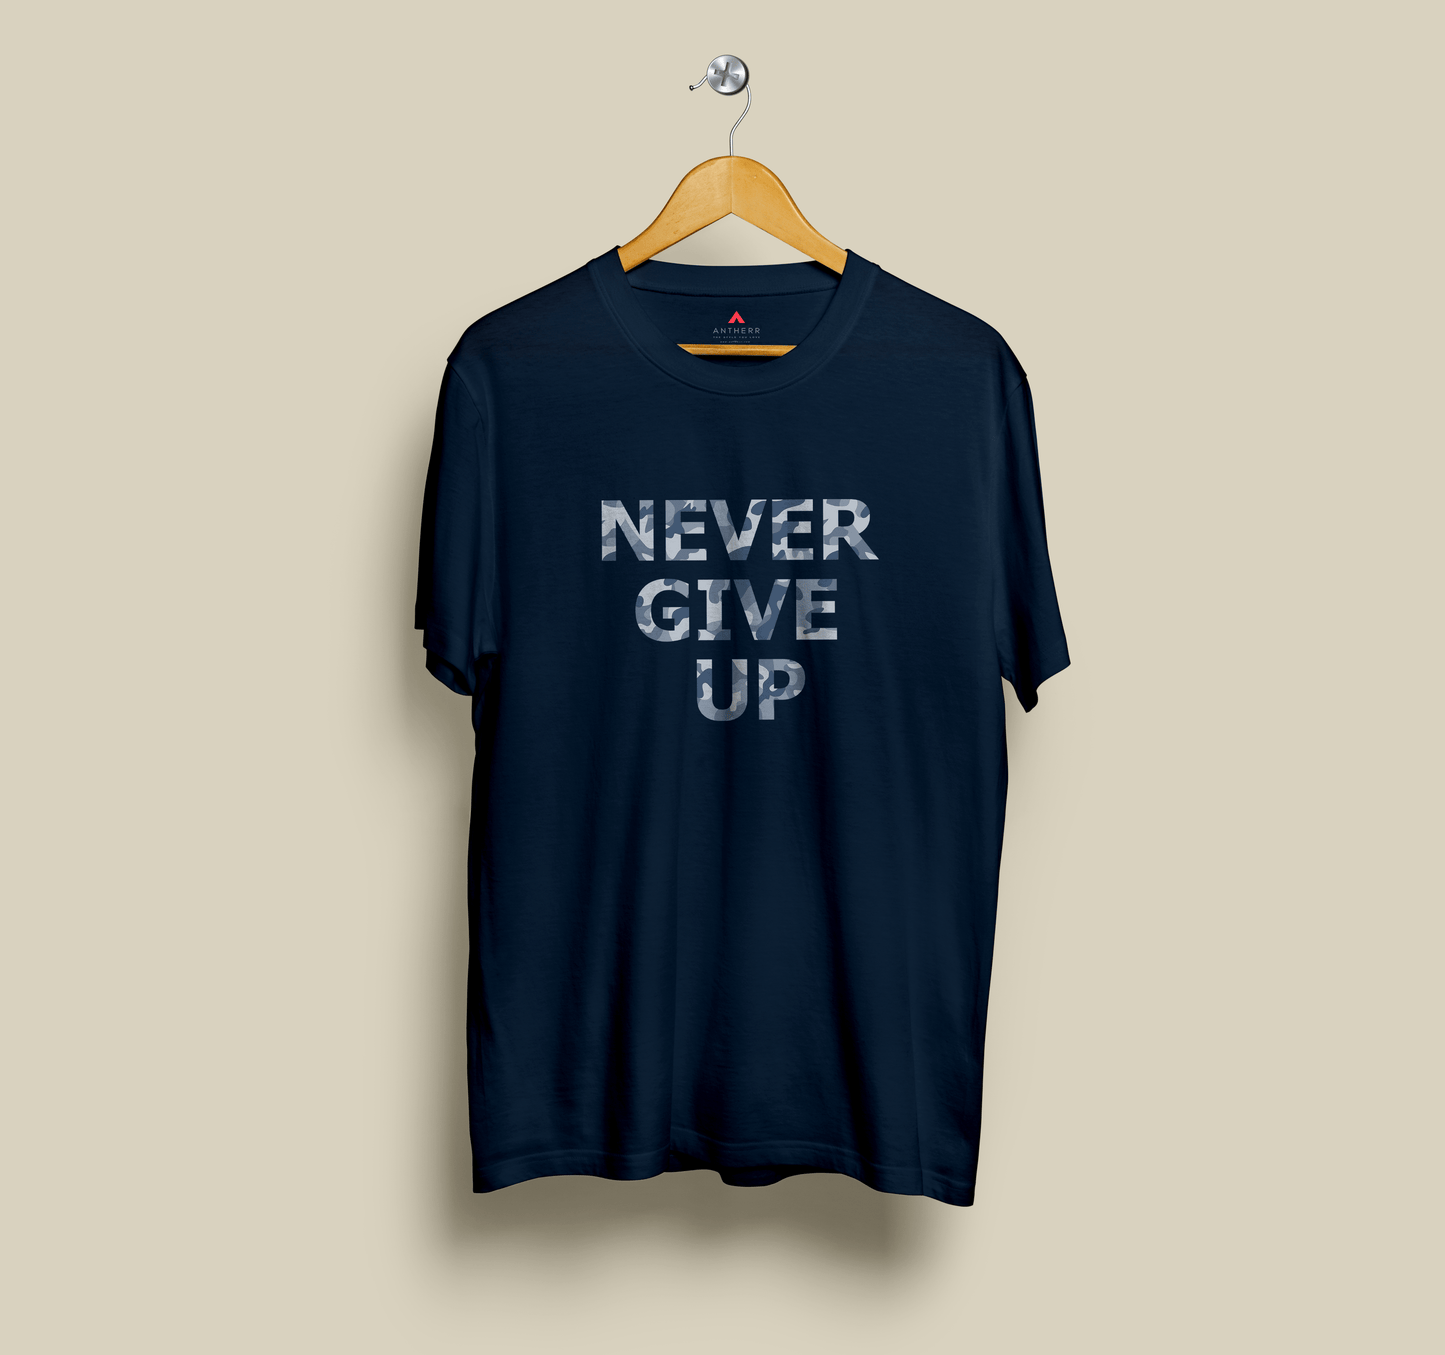 NEVER GIVE UP HALF SLEEVE T-SHIRT NAVY BLUE